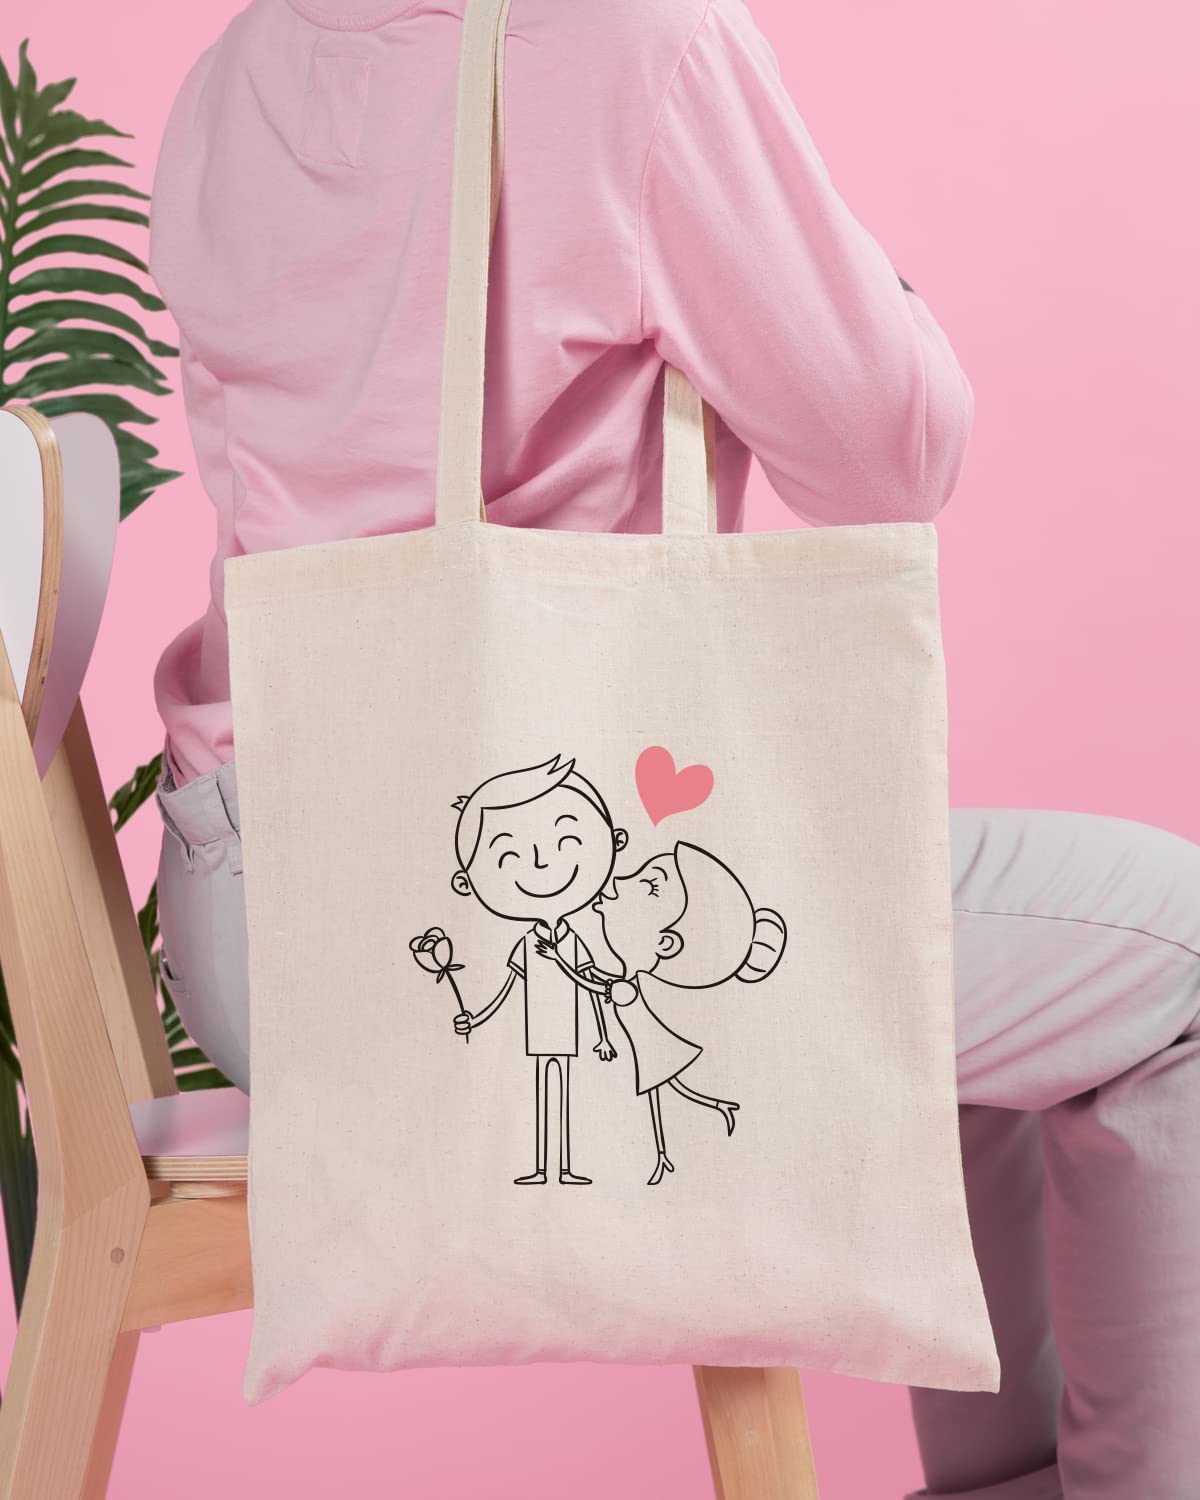 The Pink Magnet Cute Couple Illustration Tote Bag - Canvas Tote Bag for Women | Printed Multipurpose Cotton Bags | Cute Hand Bag for Girls | Best for College, Travel, Grocery | Reusable Shopping Bag | Eco-Friendly Tote Bag